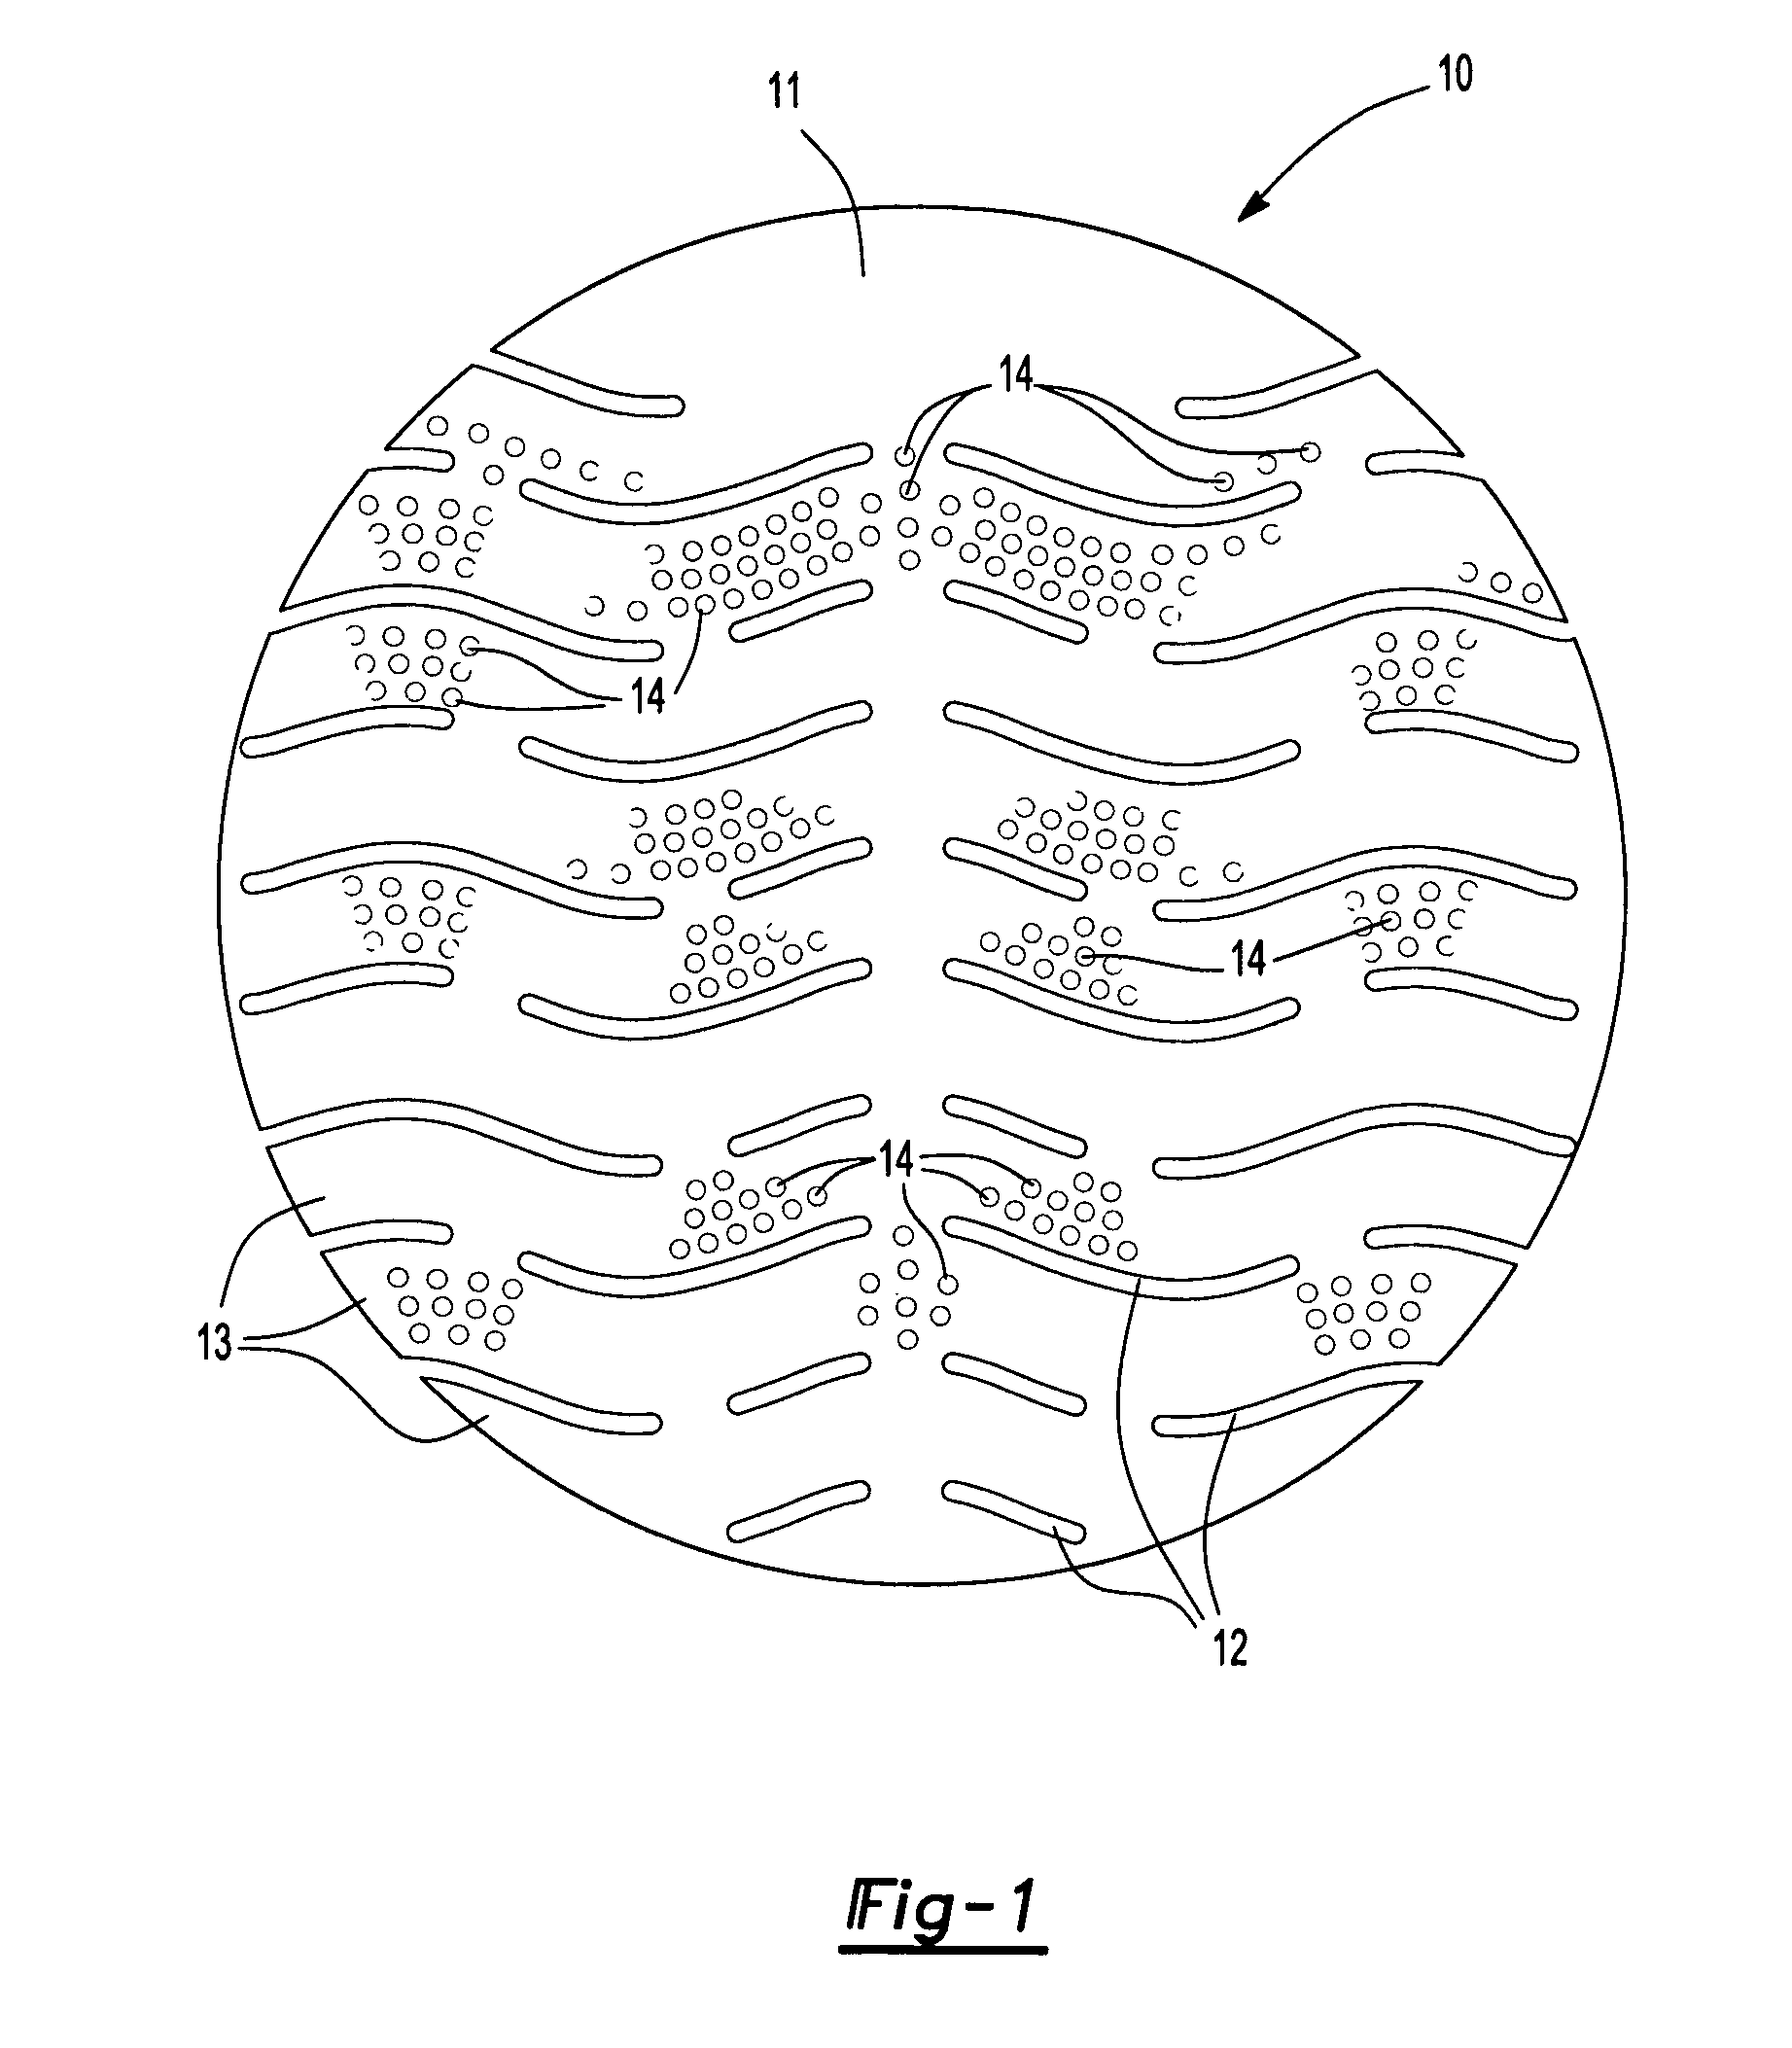 Method of manufacture air freshening article